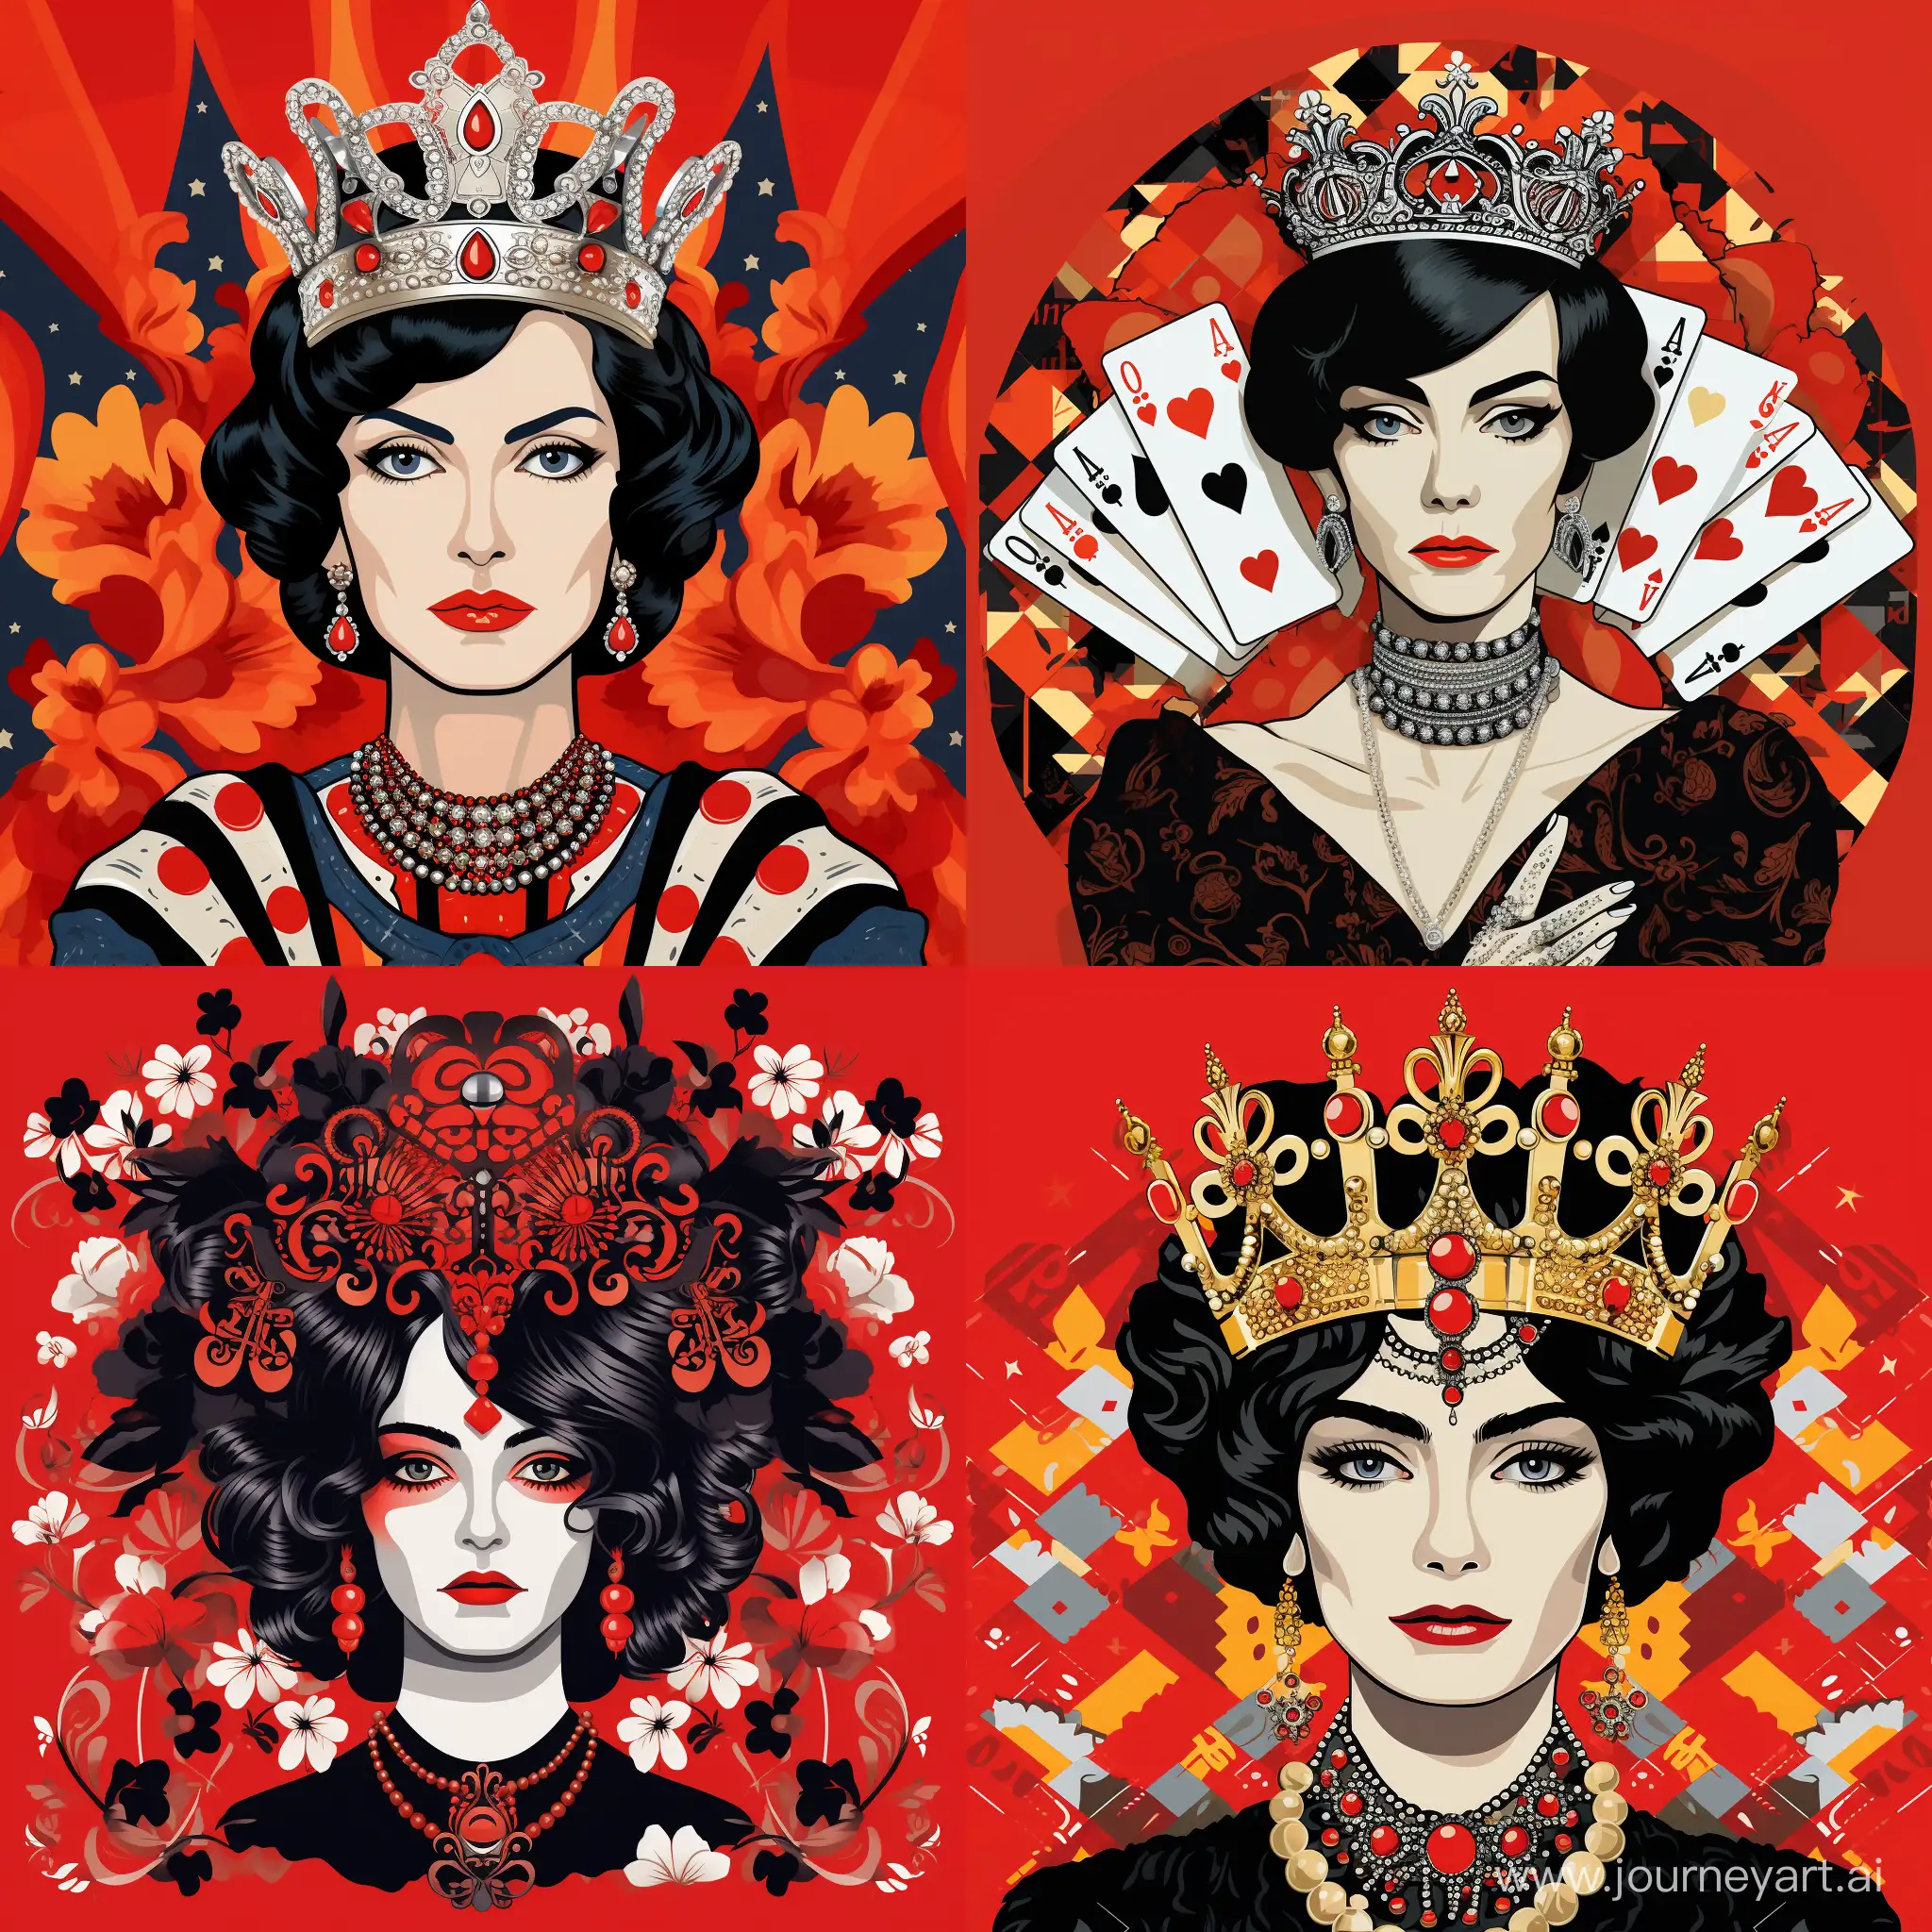 MiddleAged-Coco-Chanel-with-Crown-in-Stylish-Pop-Art-Fashion